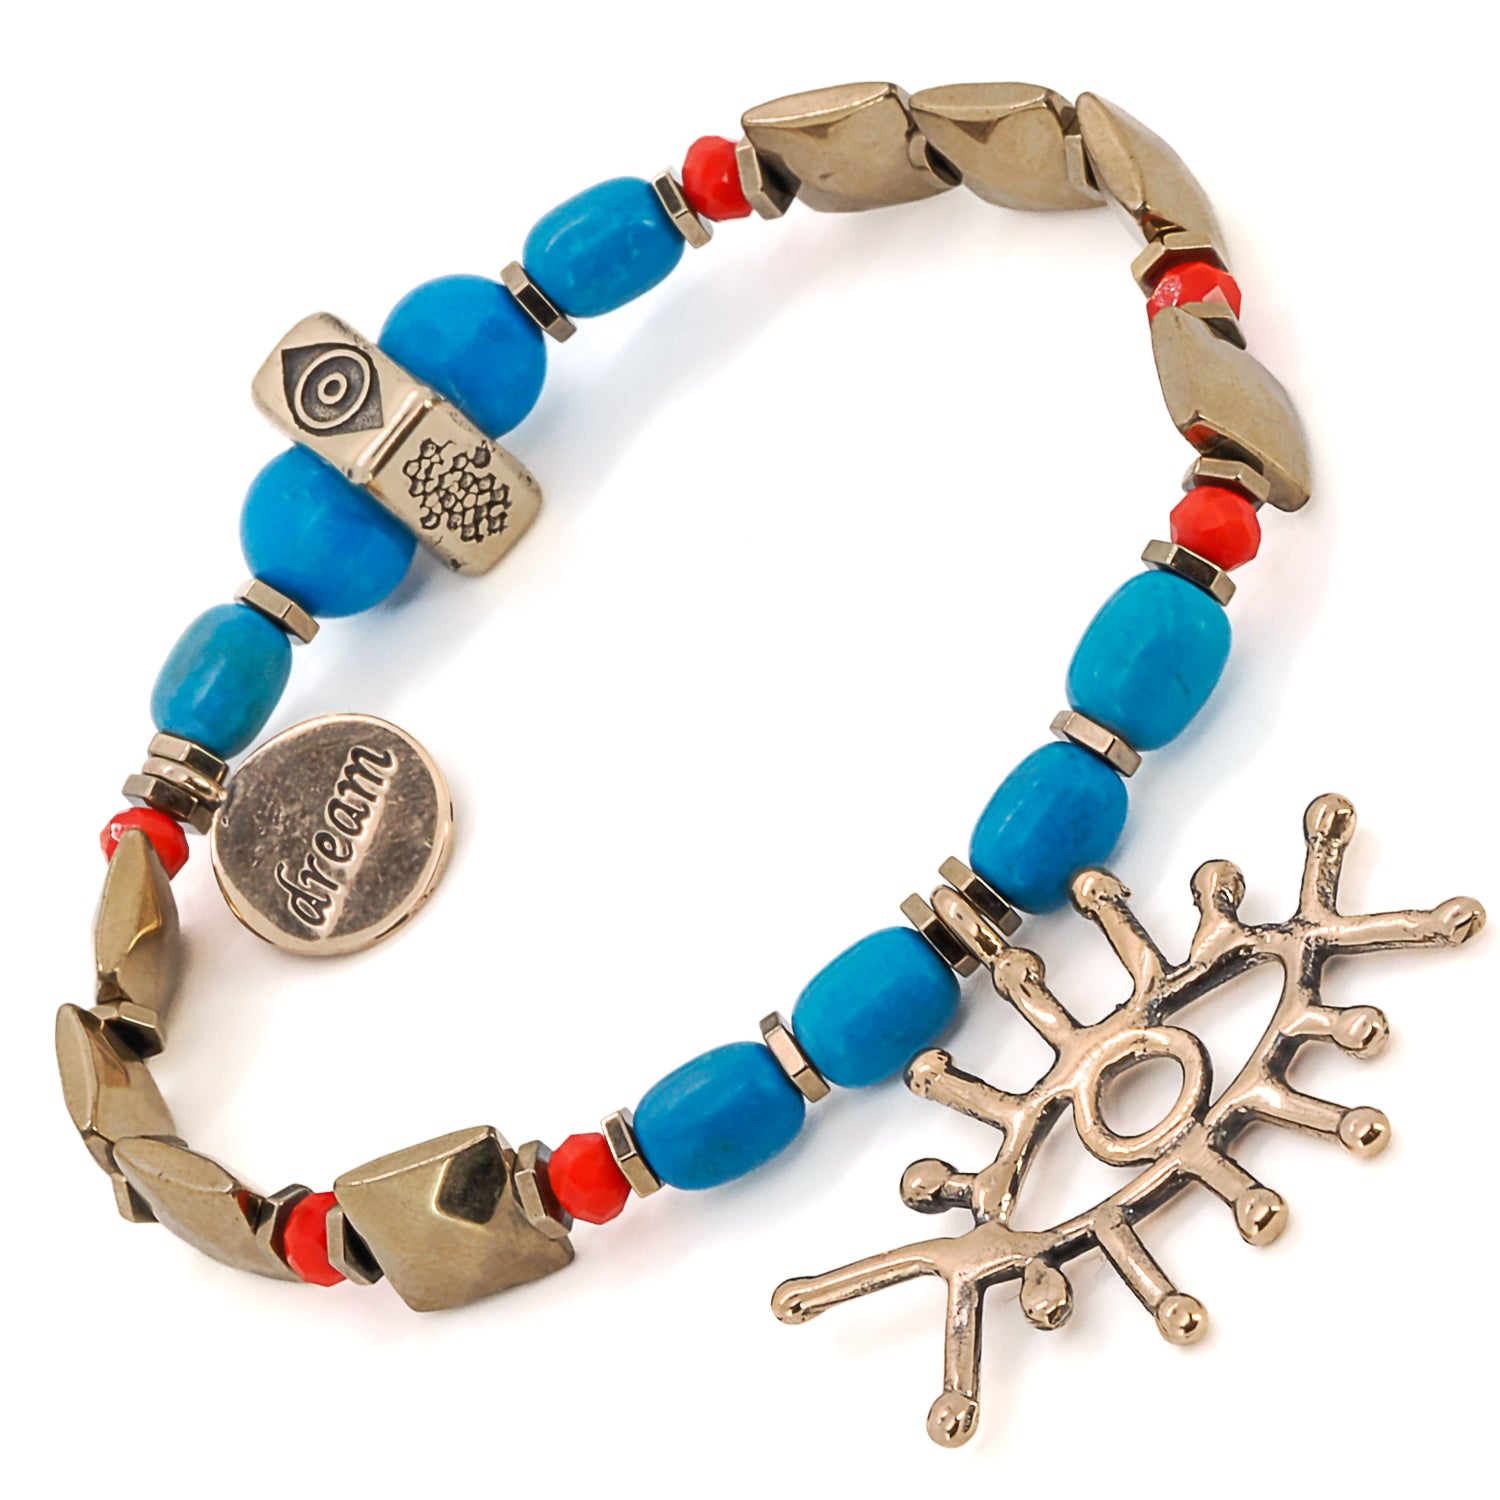 The Evil Eye Dream Bracelet, a handmade piece of jewelry with turquoise beads, an evil eye charm, and a dream symbol charm.